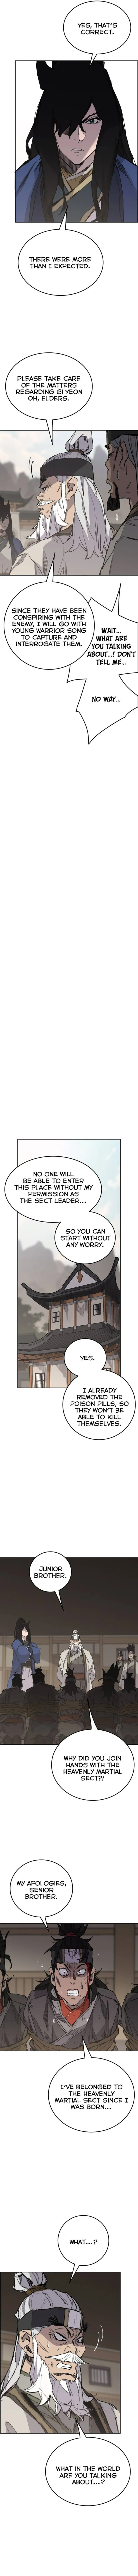 The Undefeatable Swordsman - Chapter 152 Page 4